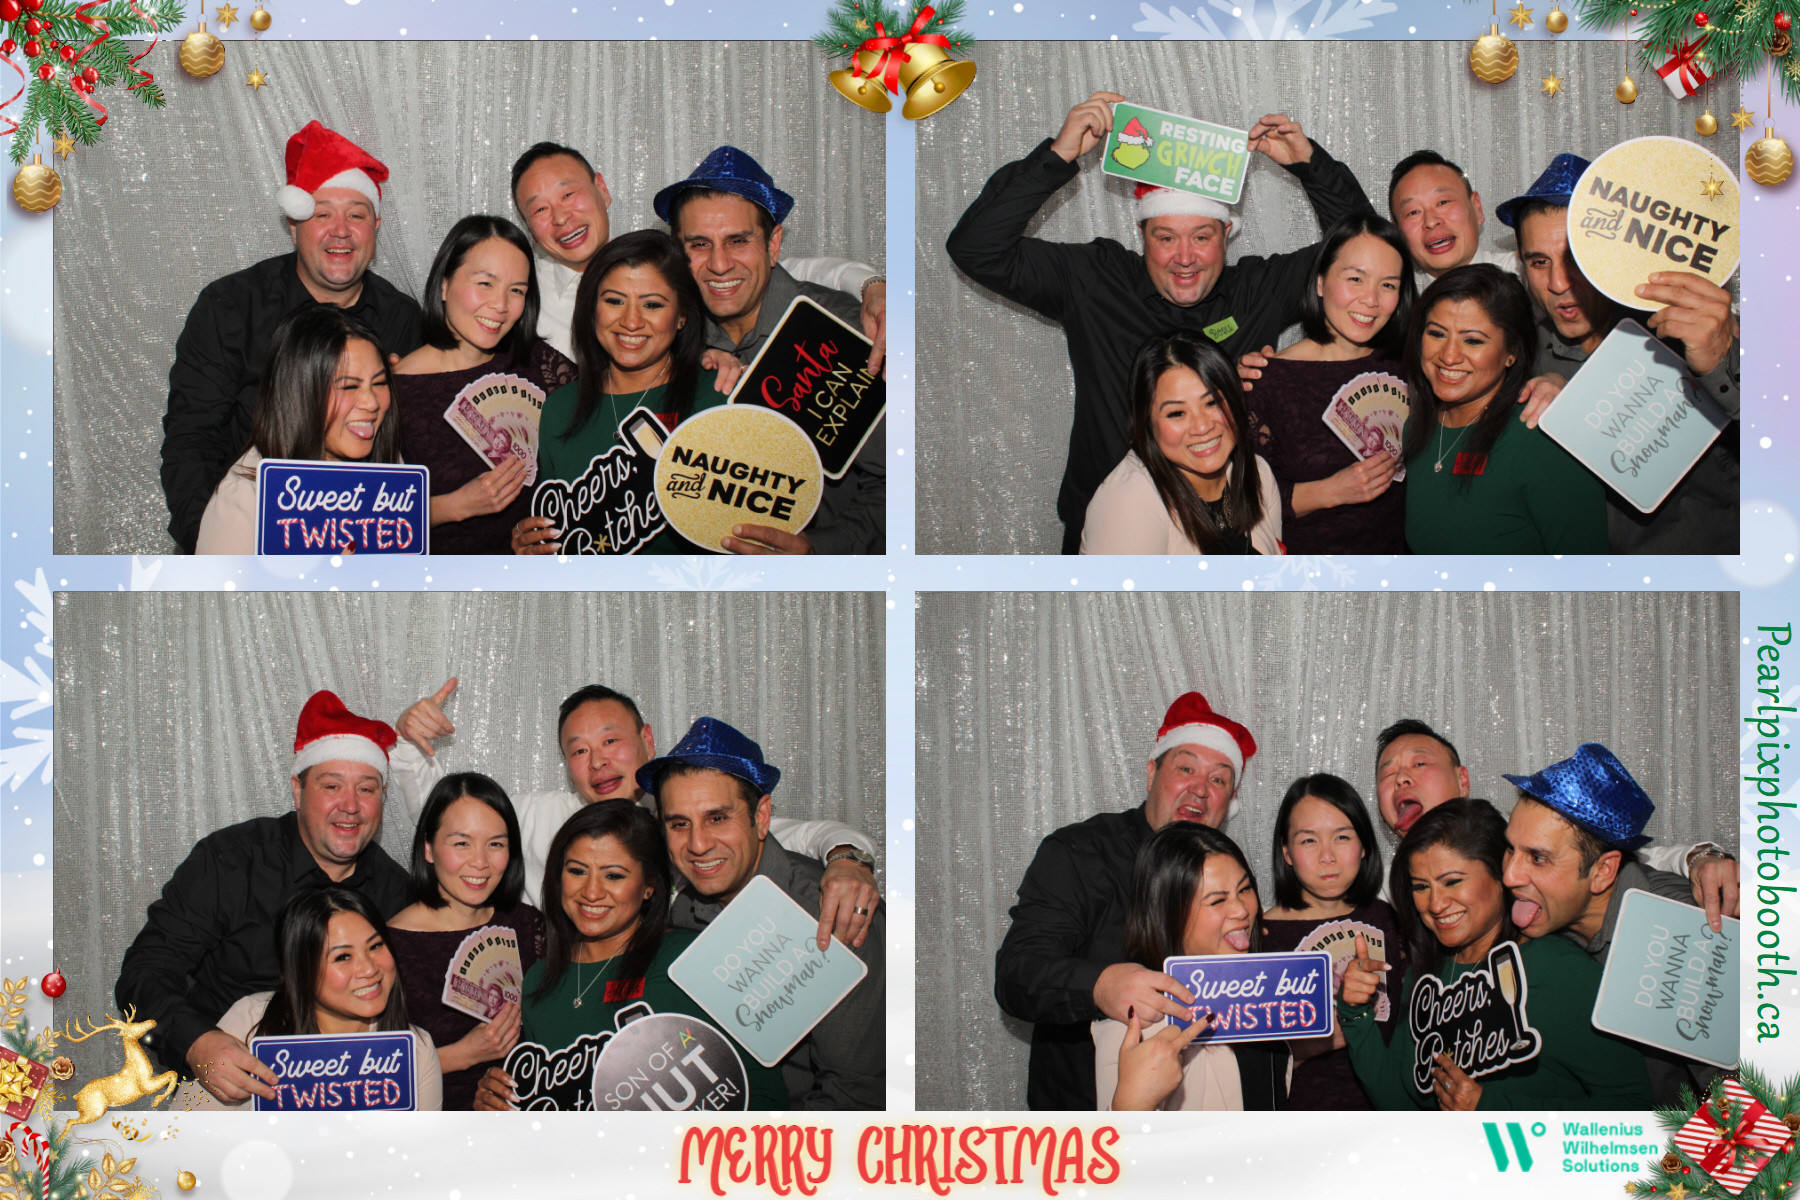 WWS Christmas Party_36